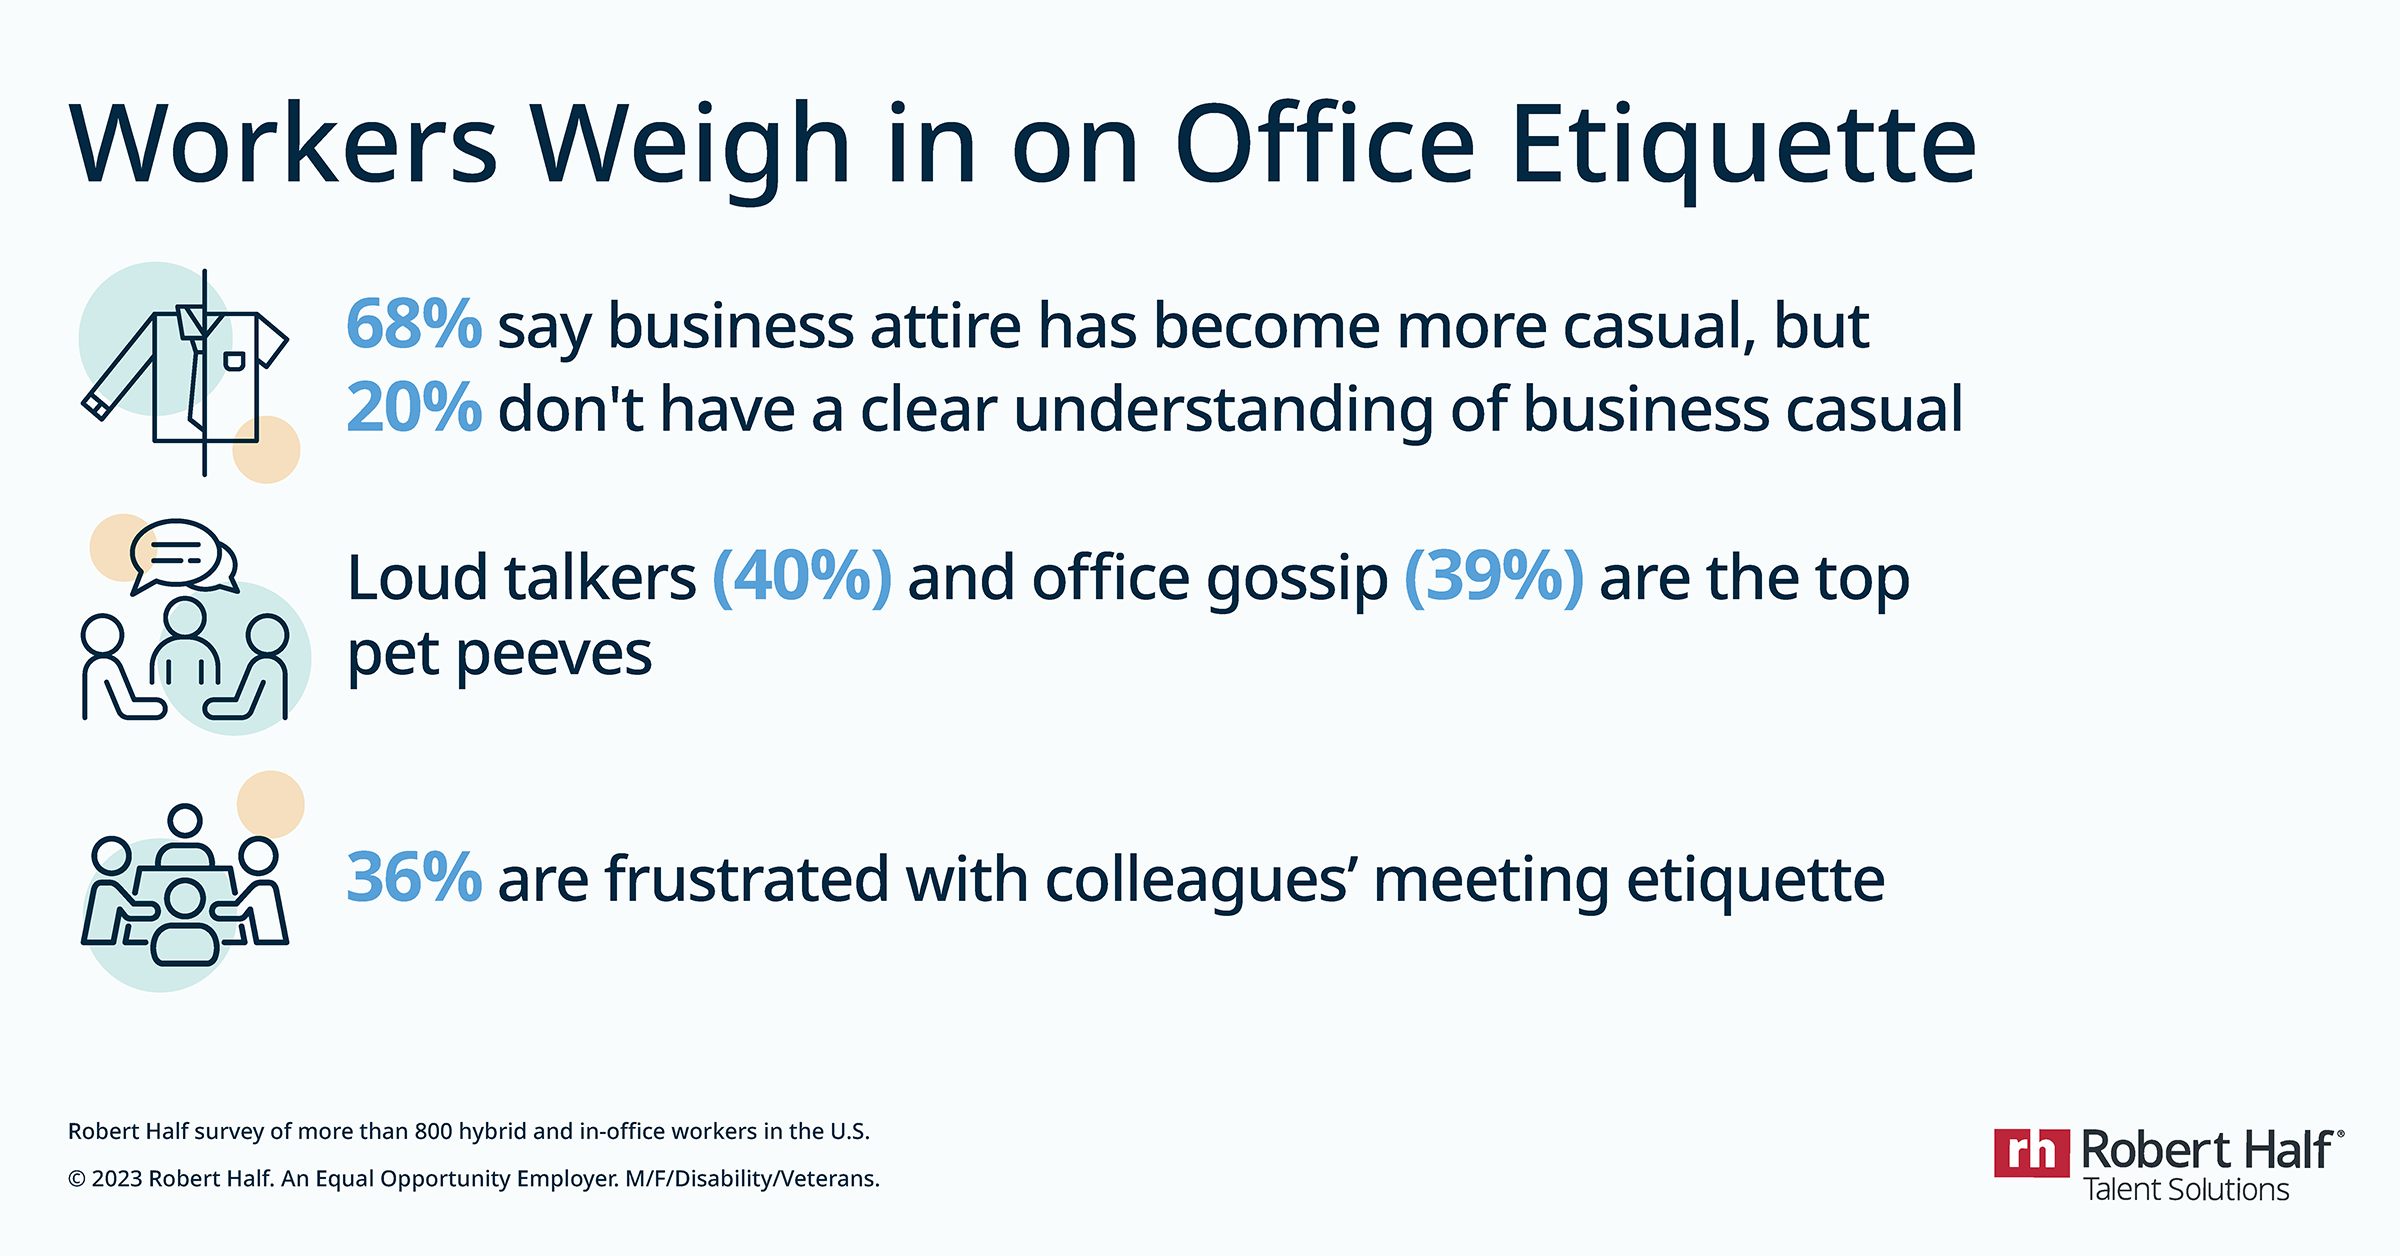 Workers Weigh in on Office Etiquette